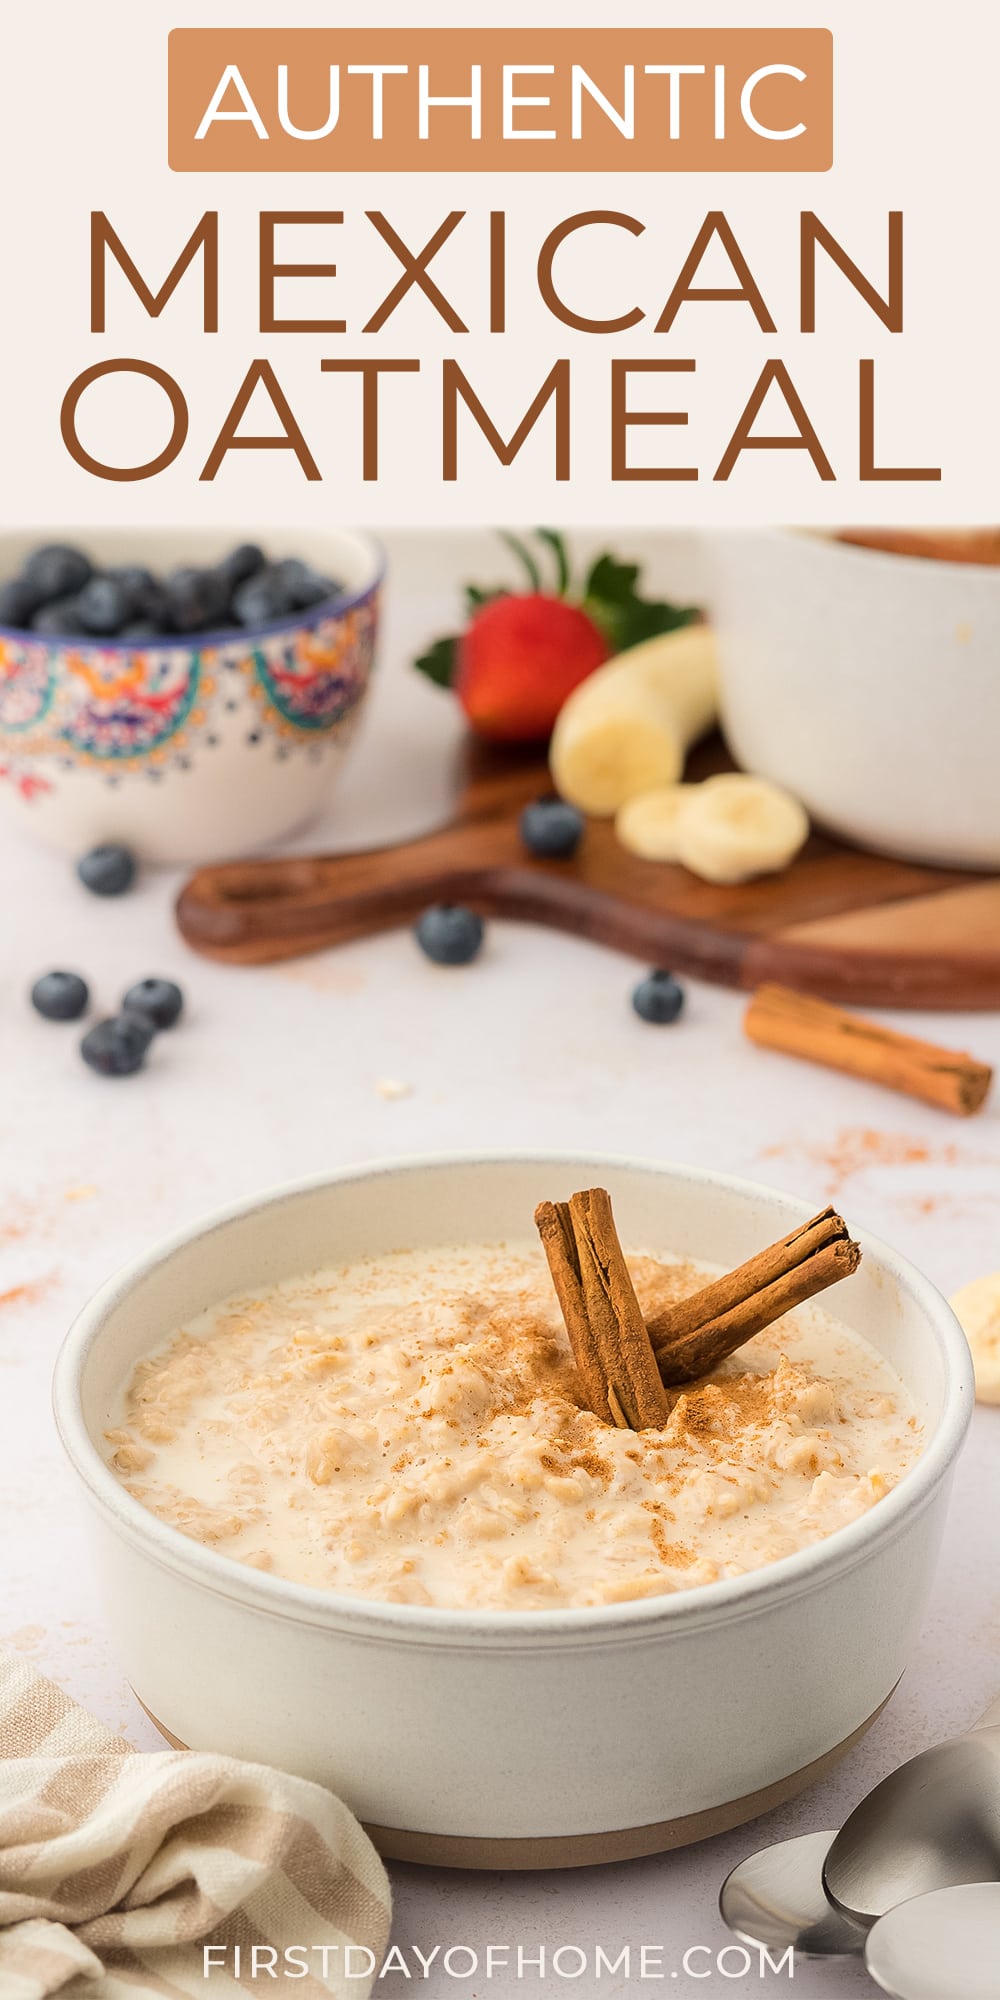 Bowl of Mexican oatmeal (avena) shown with cinnamon sticks and fruit in the background